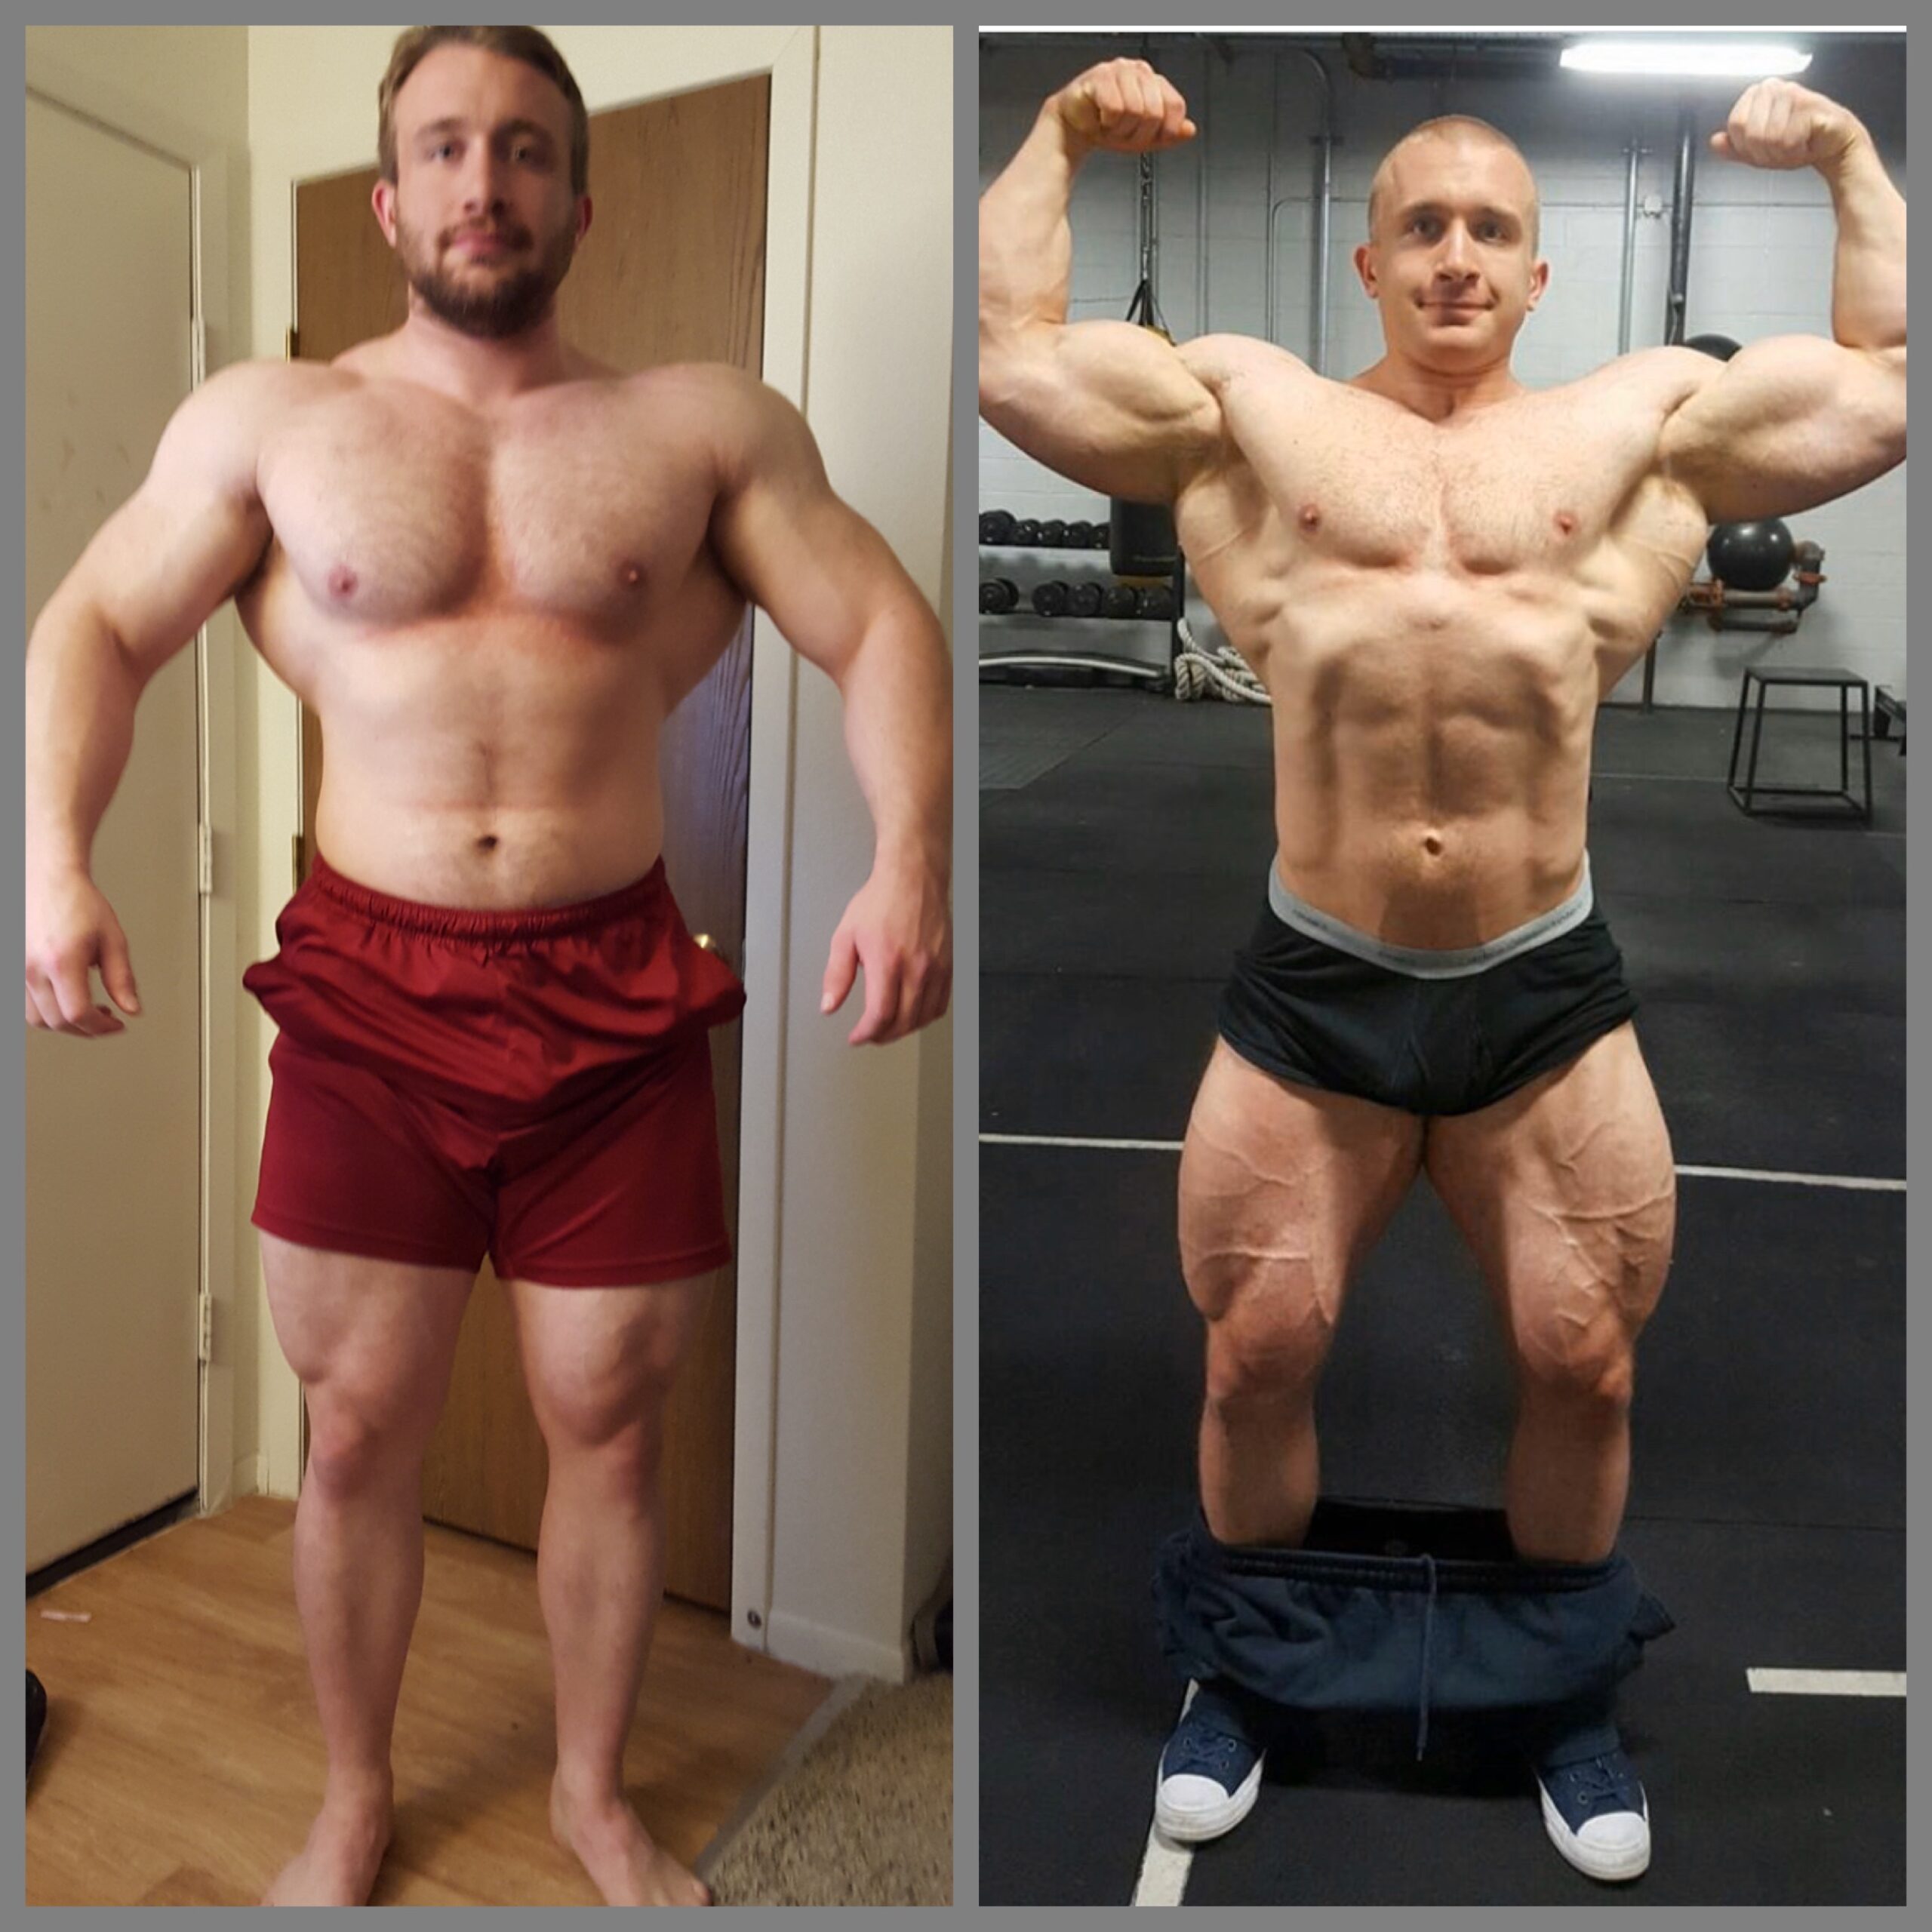 Bodybuilding before and after progress pictures.